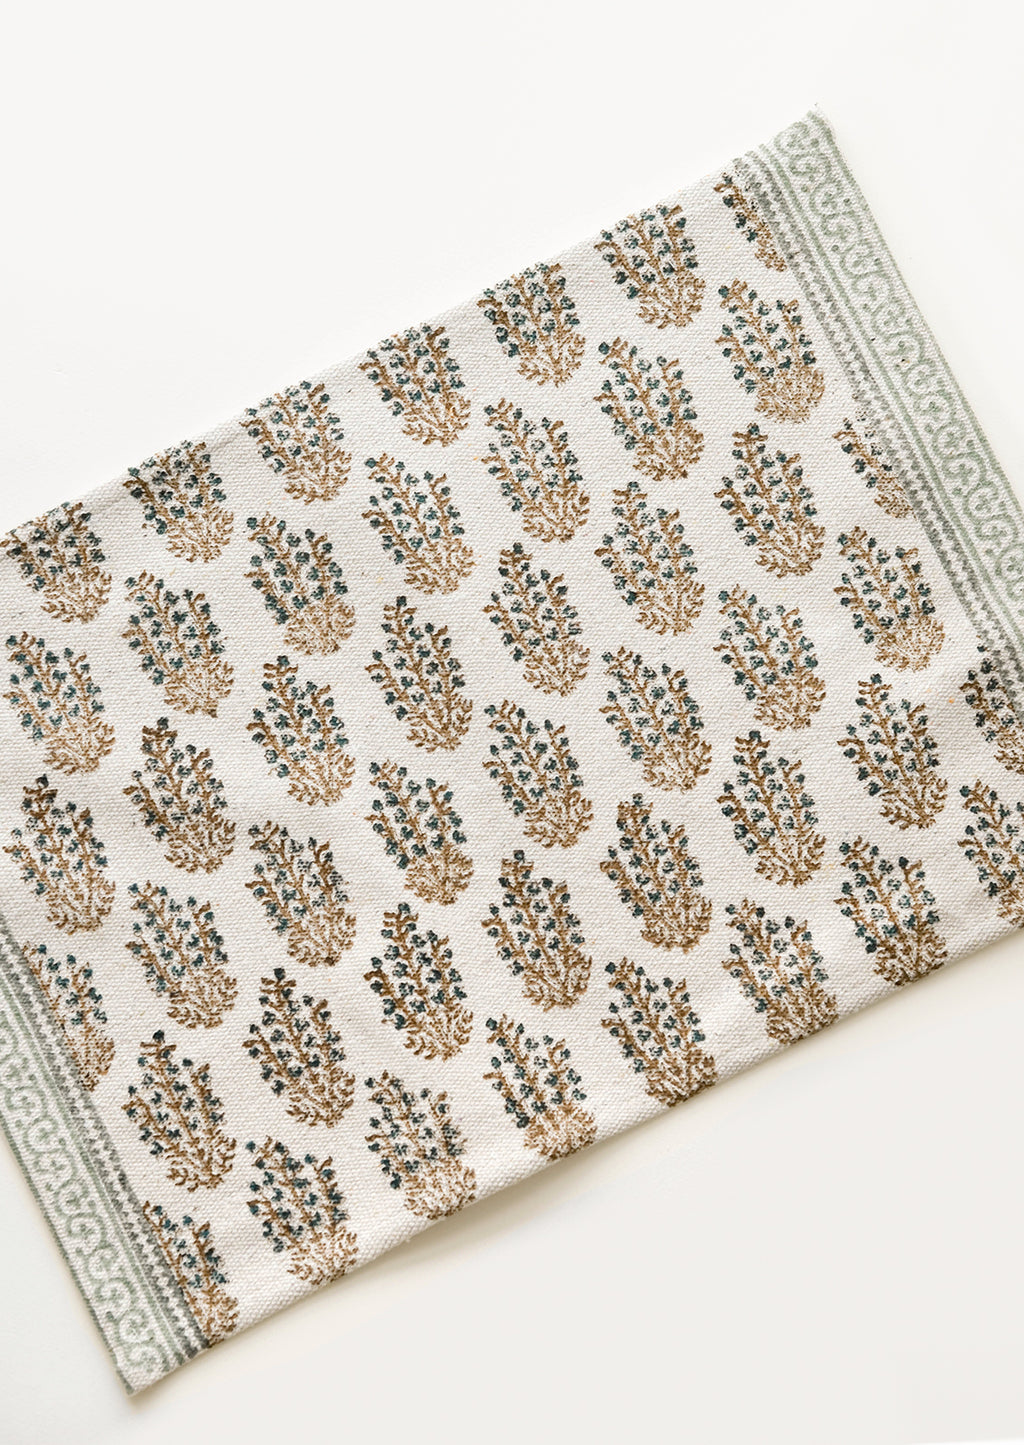 3: An ivory rectangular cotton placemat with green floral pattern.